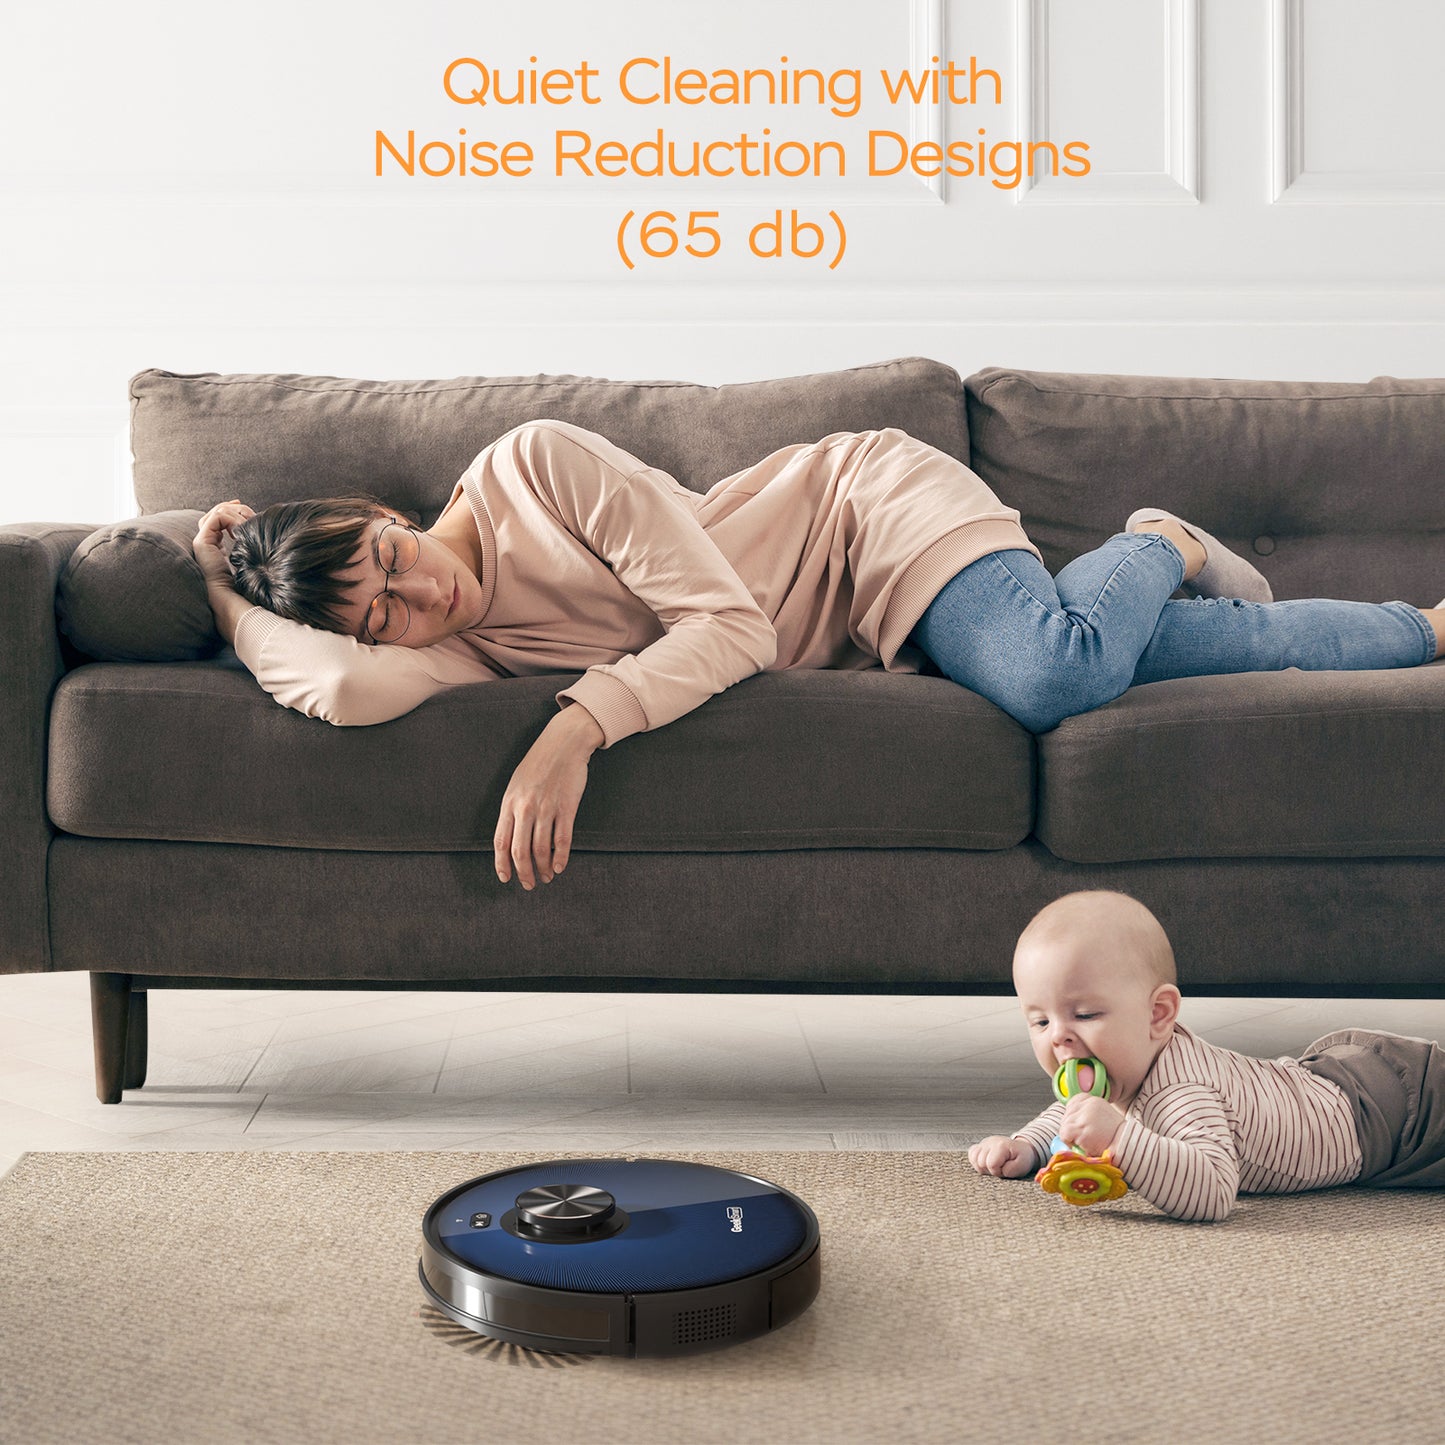 Geek Smart L7 Robot Vacuum Cleaner *And Mop, LDS Navigation, Wi-Fi Connected APP, Selective Room Cleaning,MAX 2700 PA Suction, Ideal For Pets And Larger Home